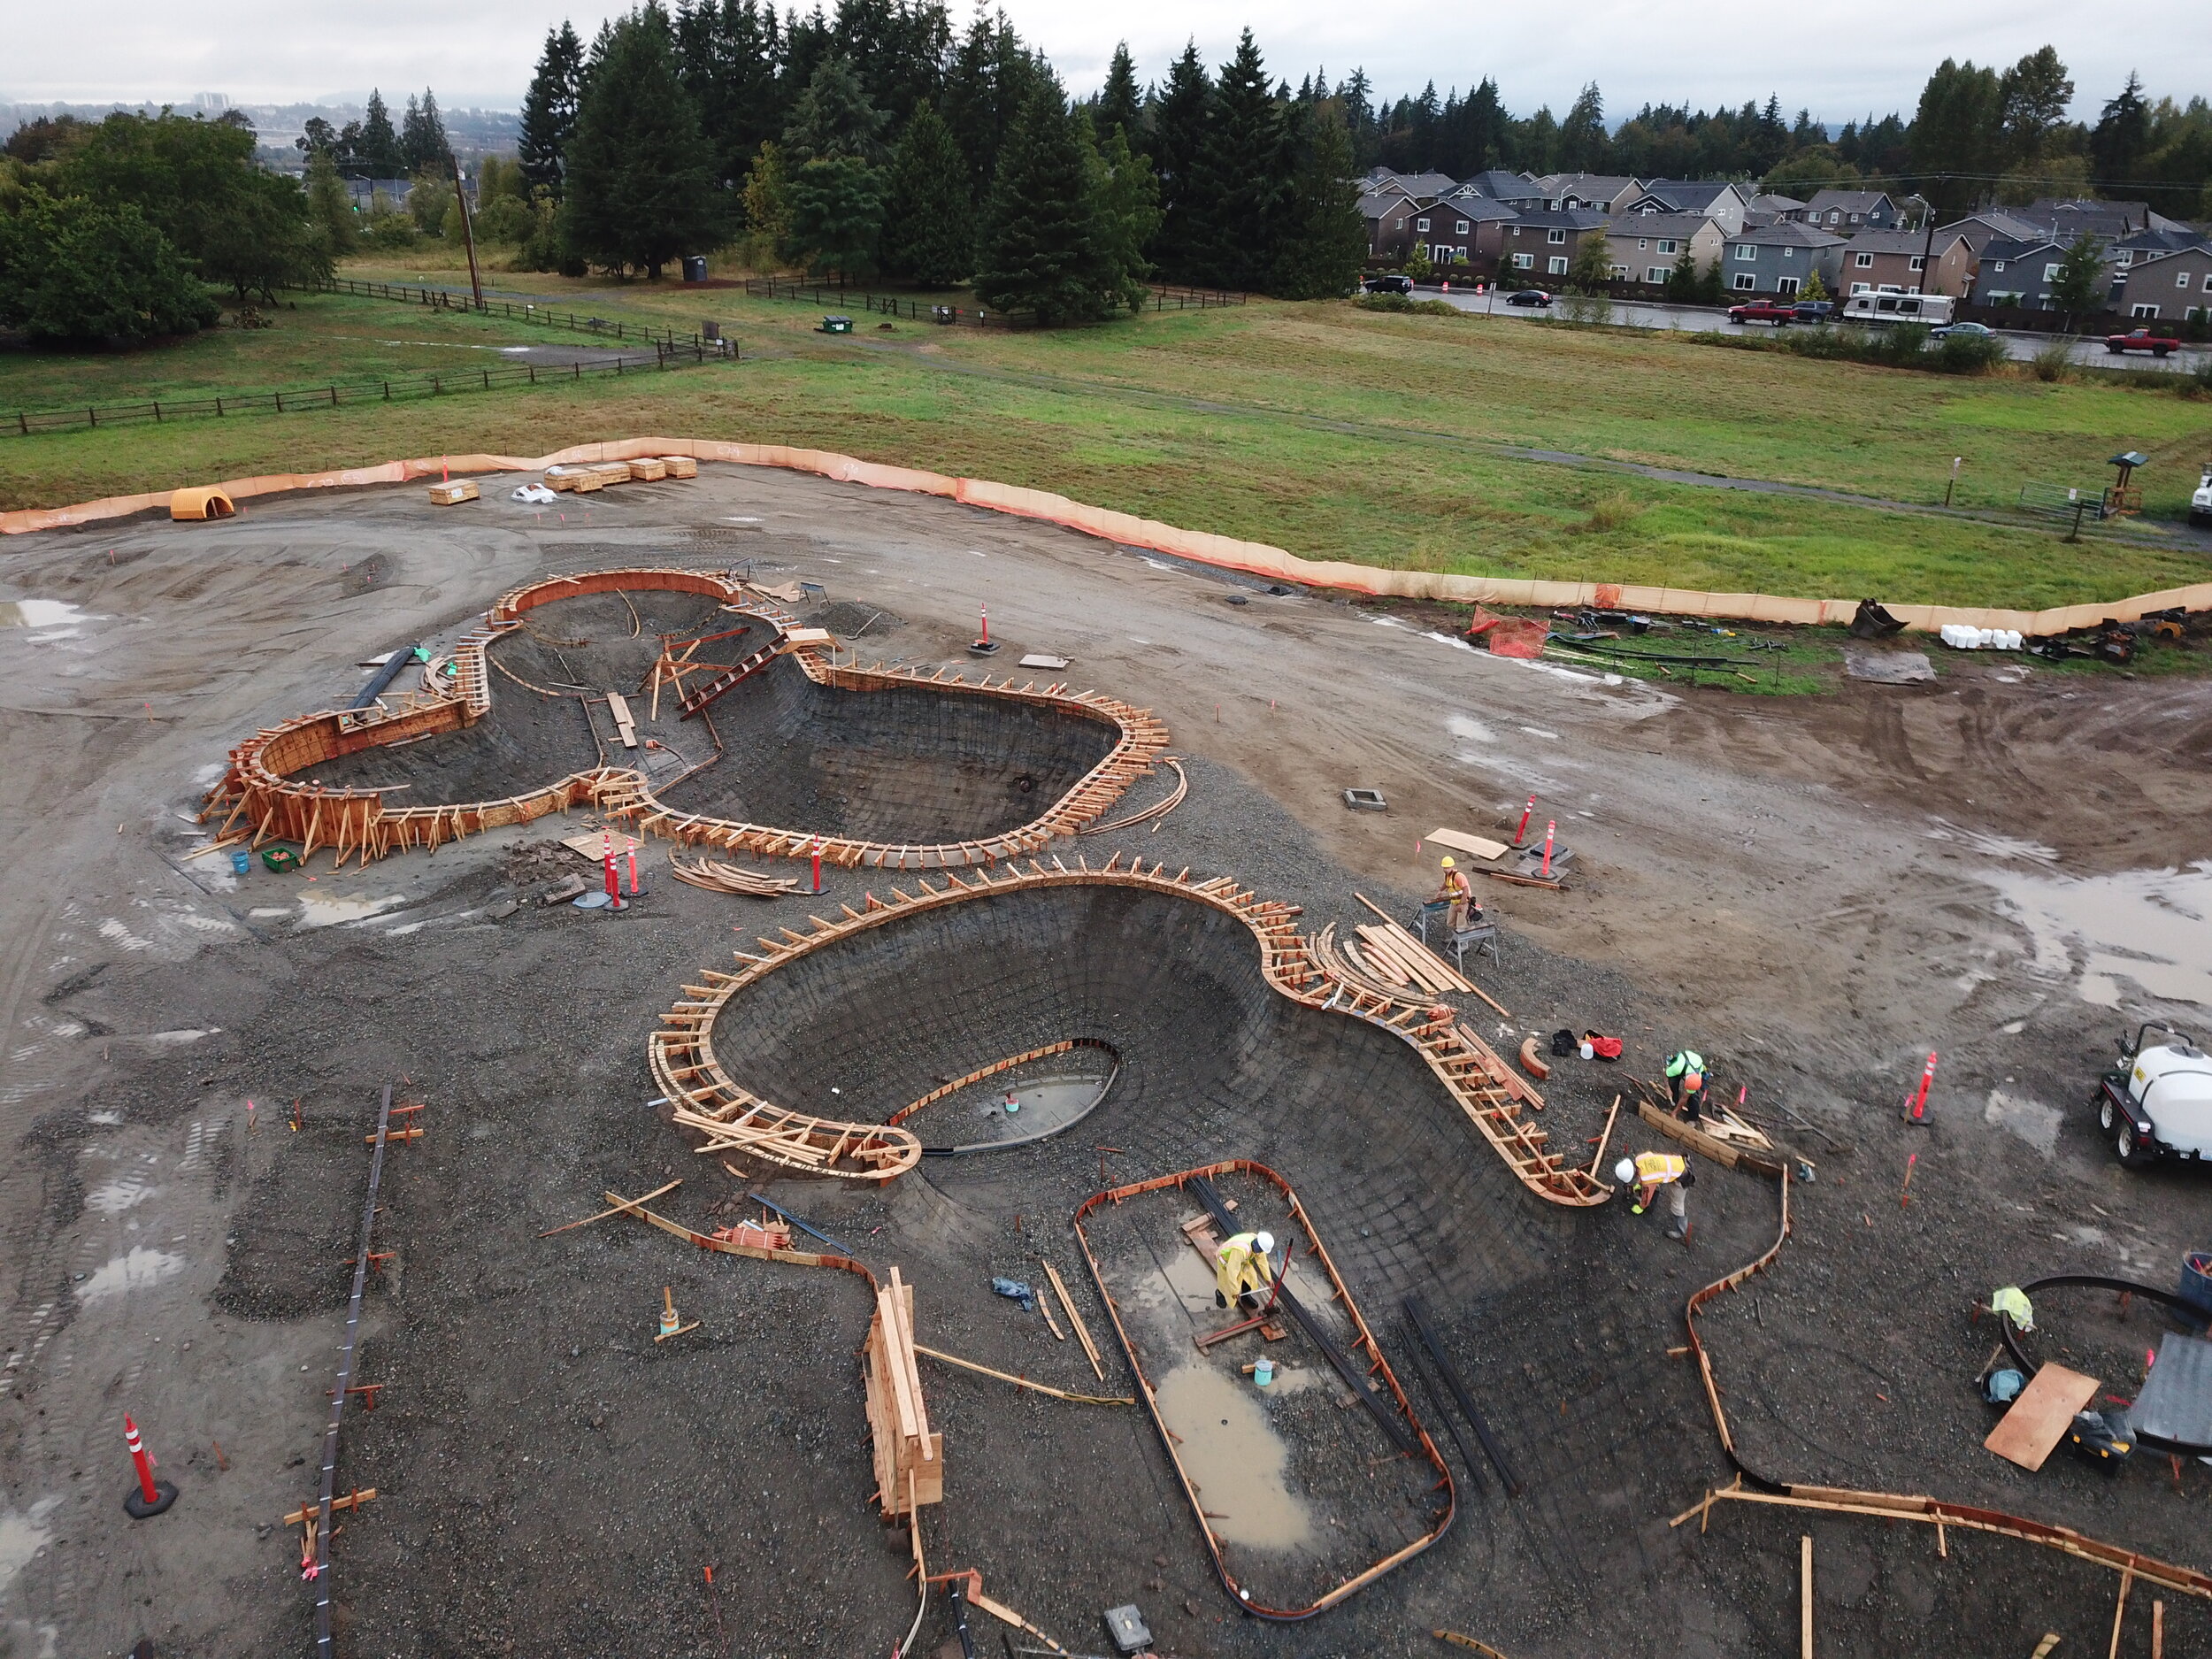 The bowl section is coming together in Lake Stevens, Washington 💪🏽 A large vert bowl with pool coping &amp; a flow bowl too